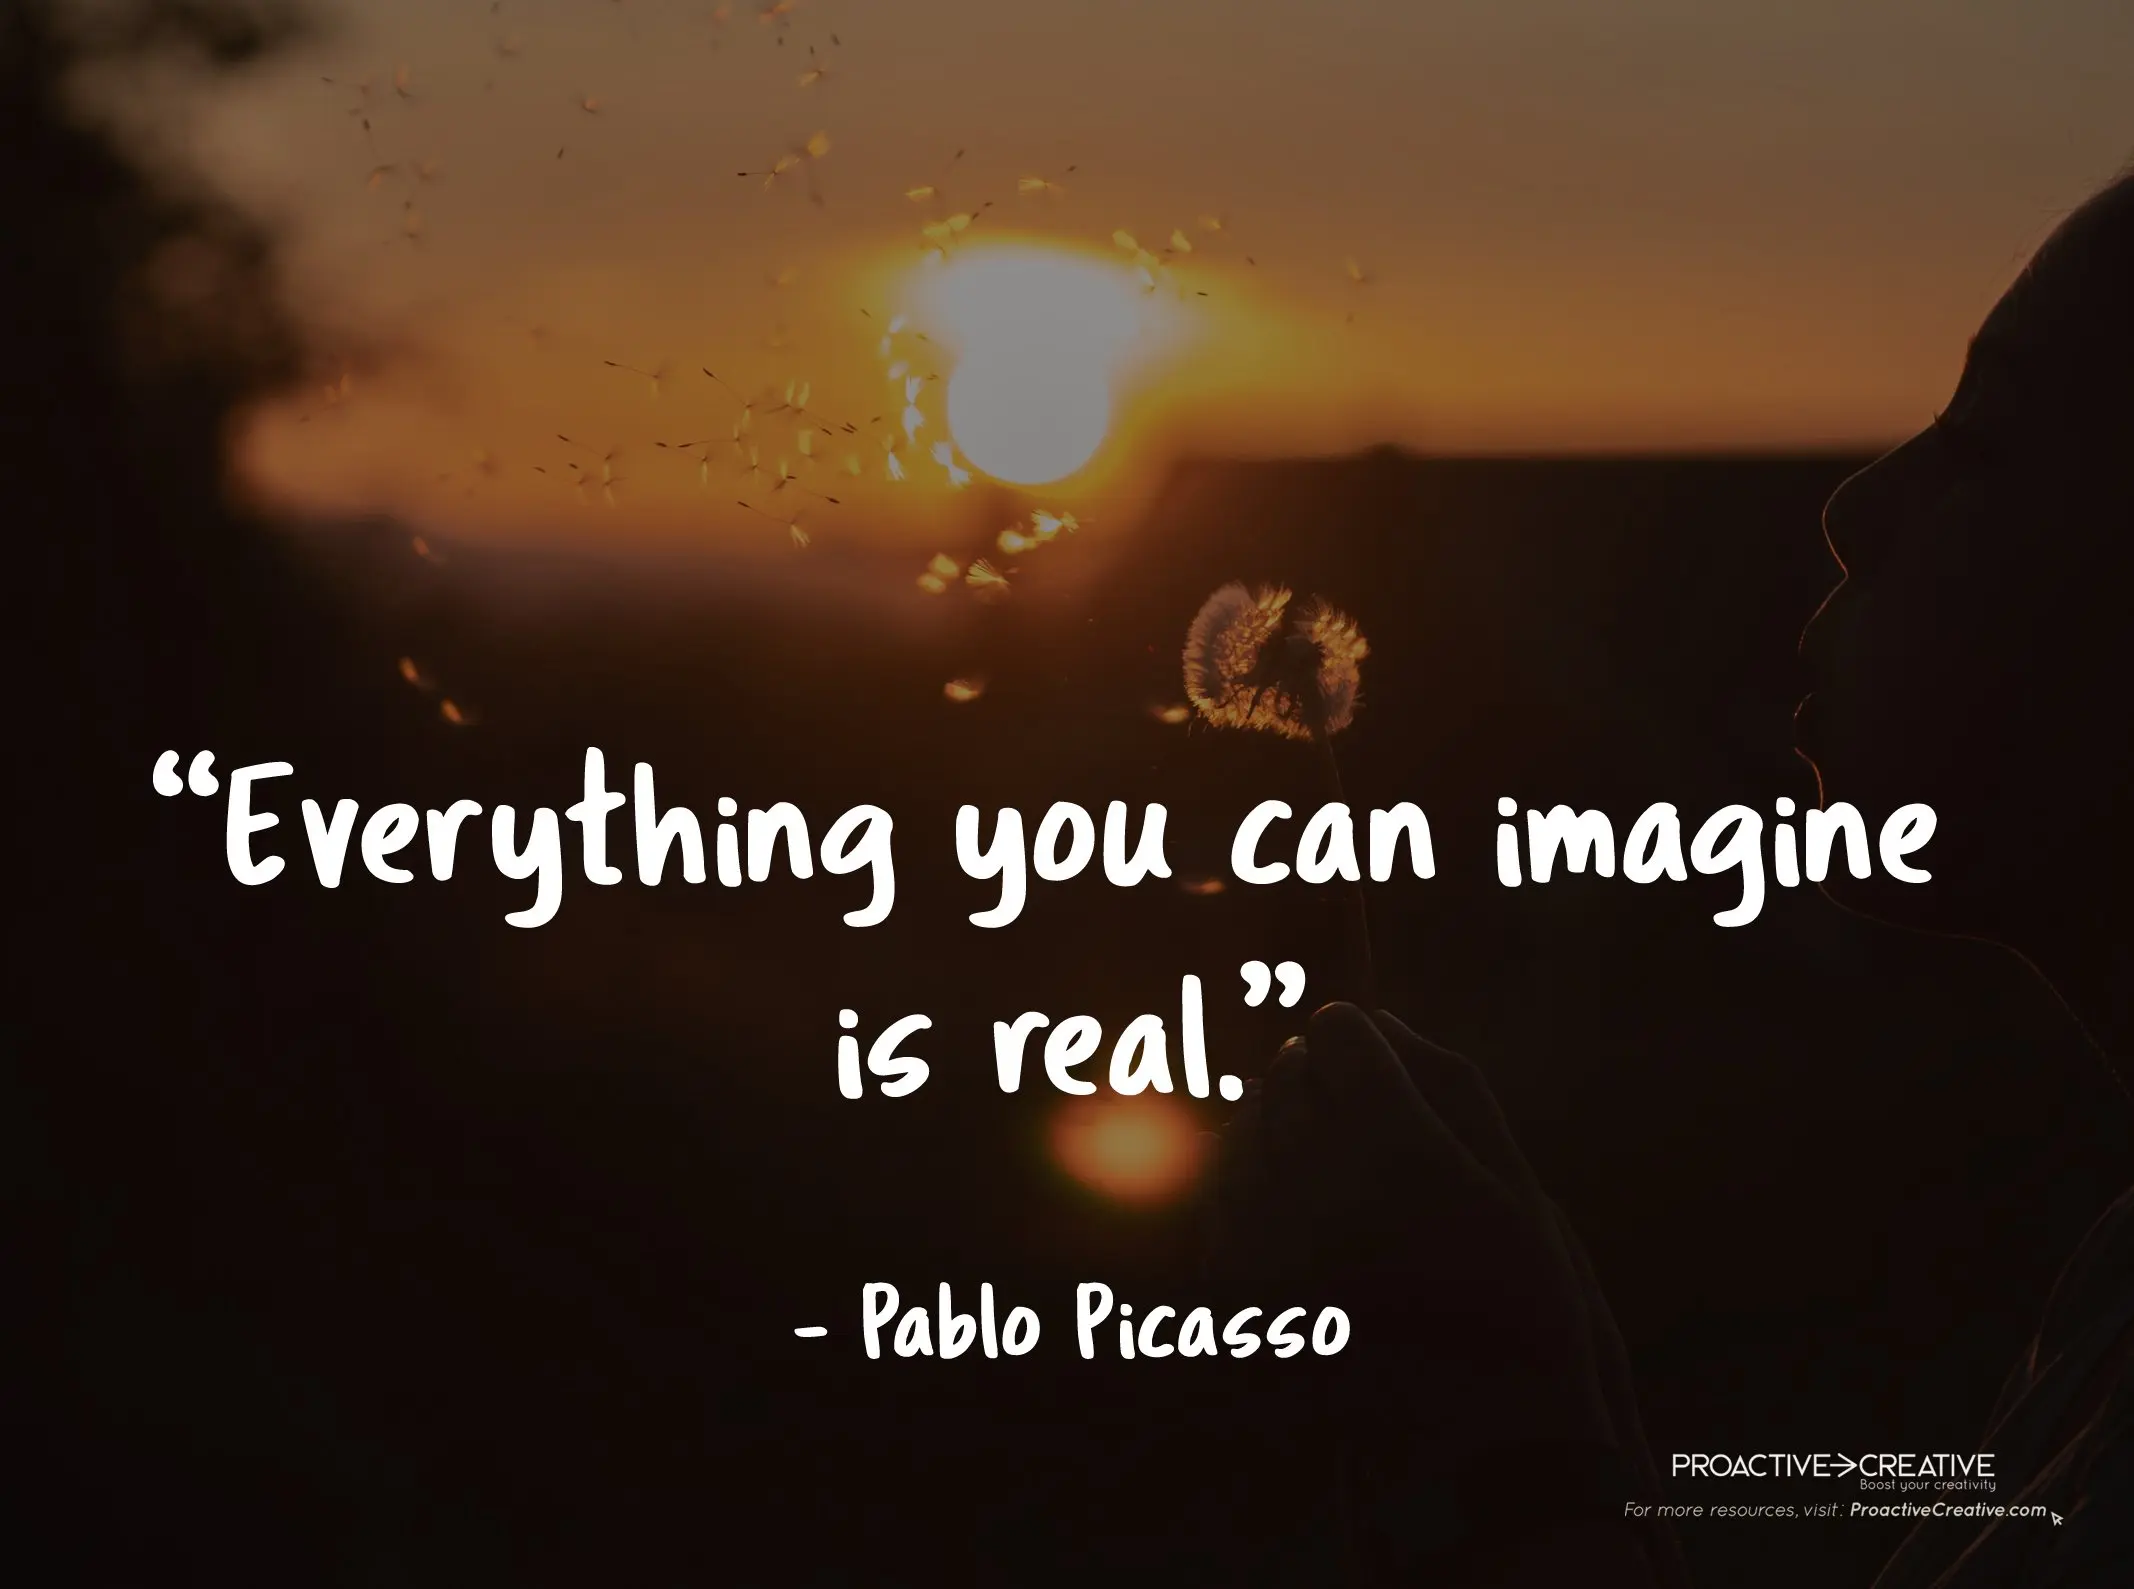 Quotes about creativity - Pablo Picasso